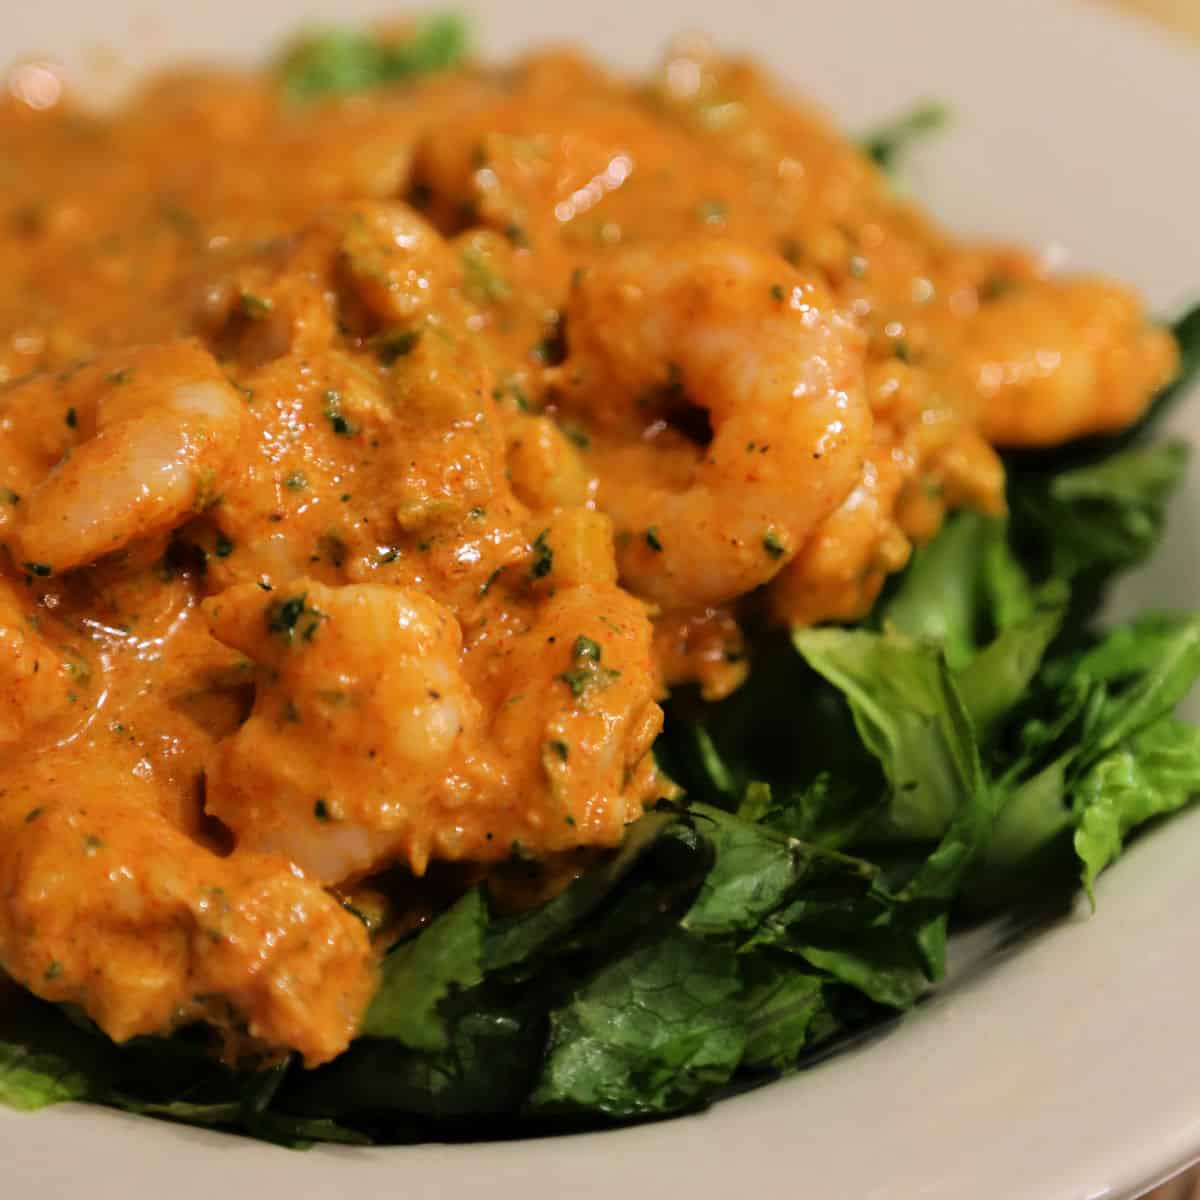 Shrimp remoulade on a bed of greens on a white plate